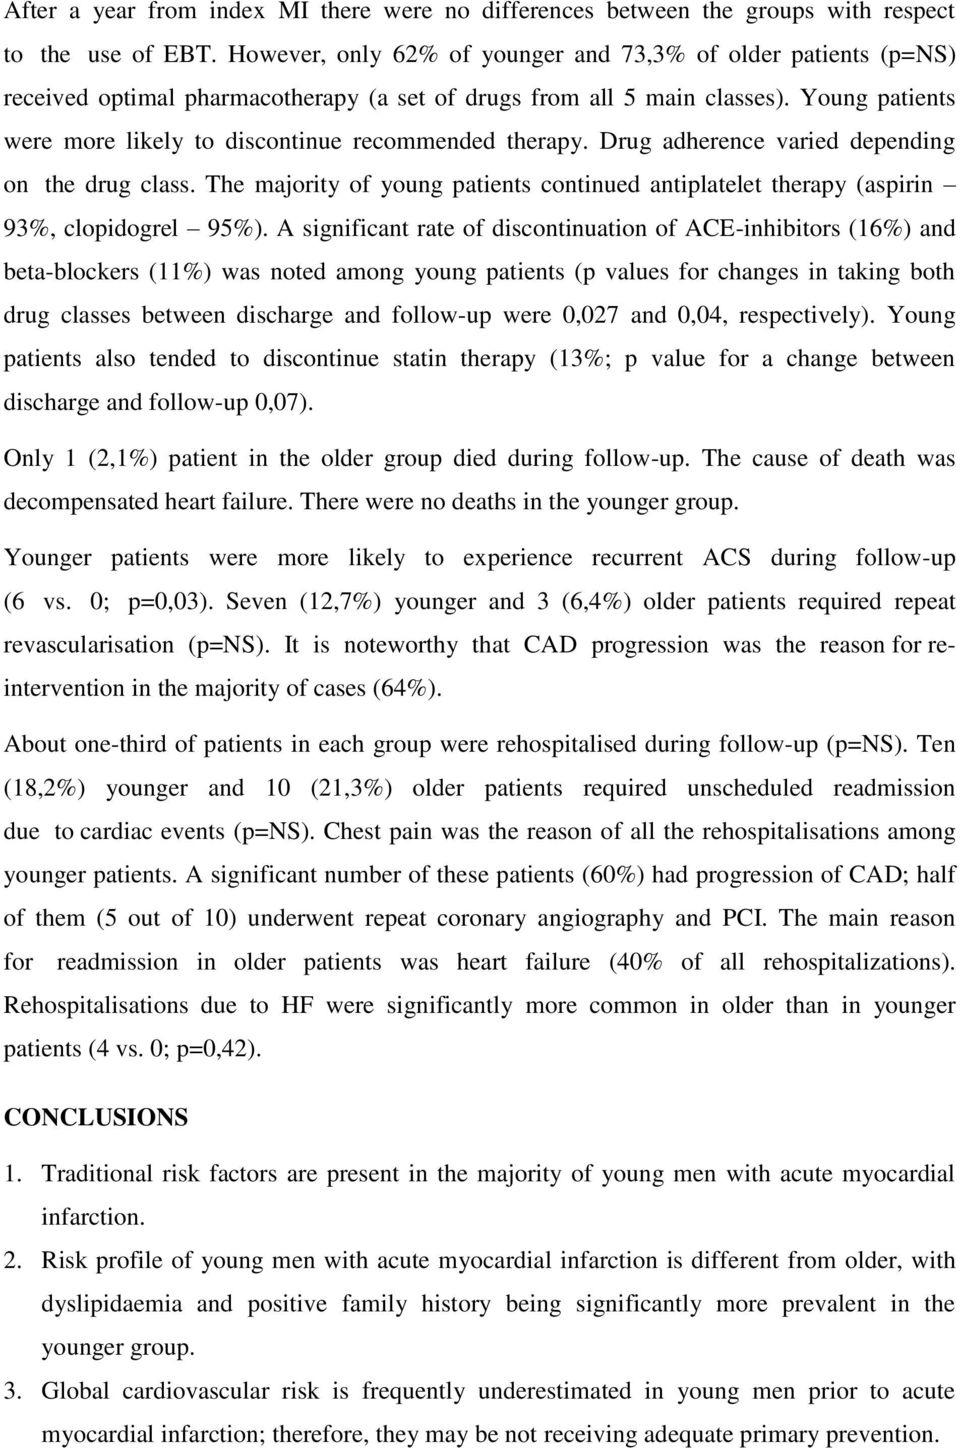 Young patients were more likely to discontinue recommended therapy. Drug adherence varied depending on the drug class.